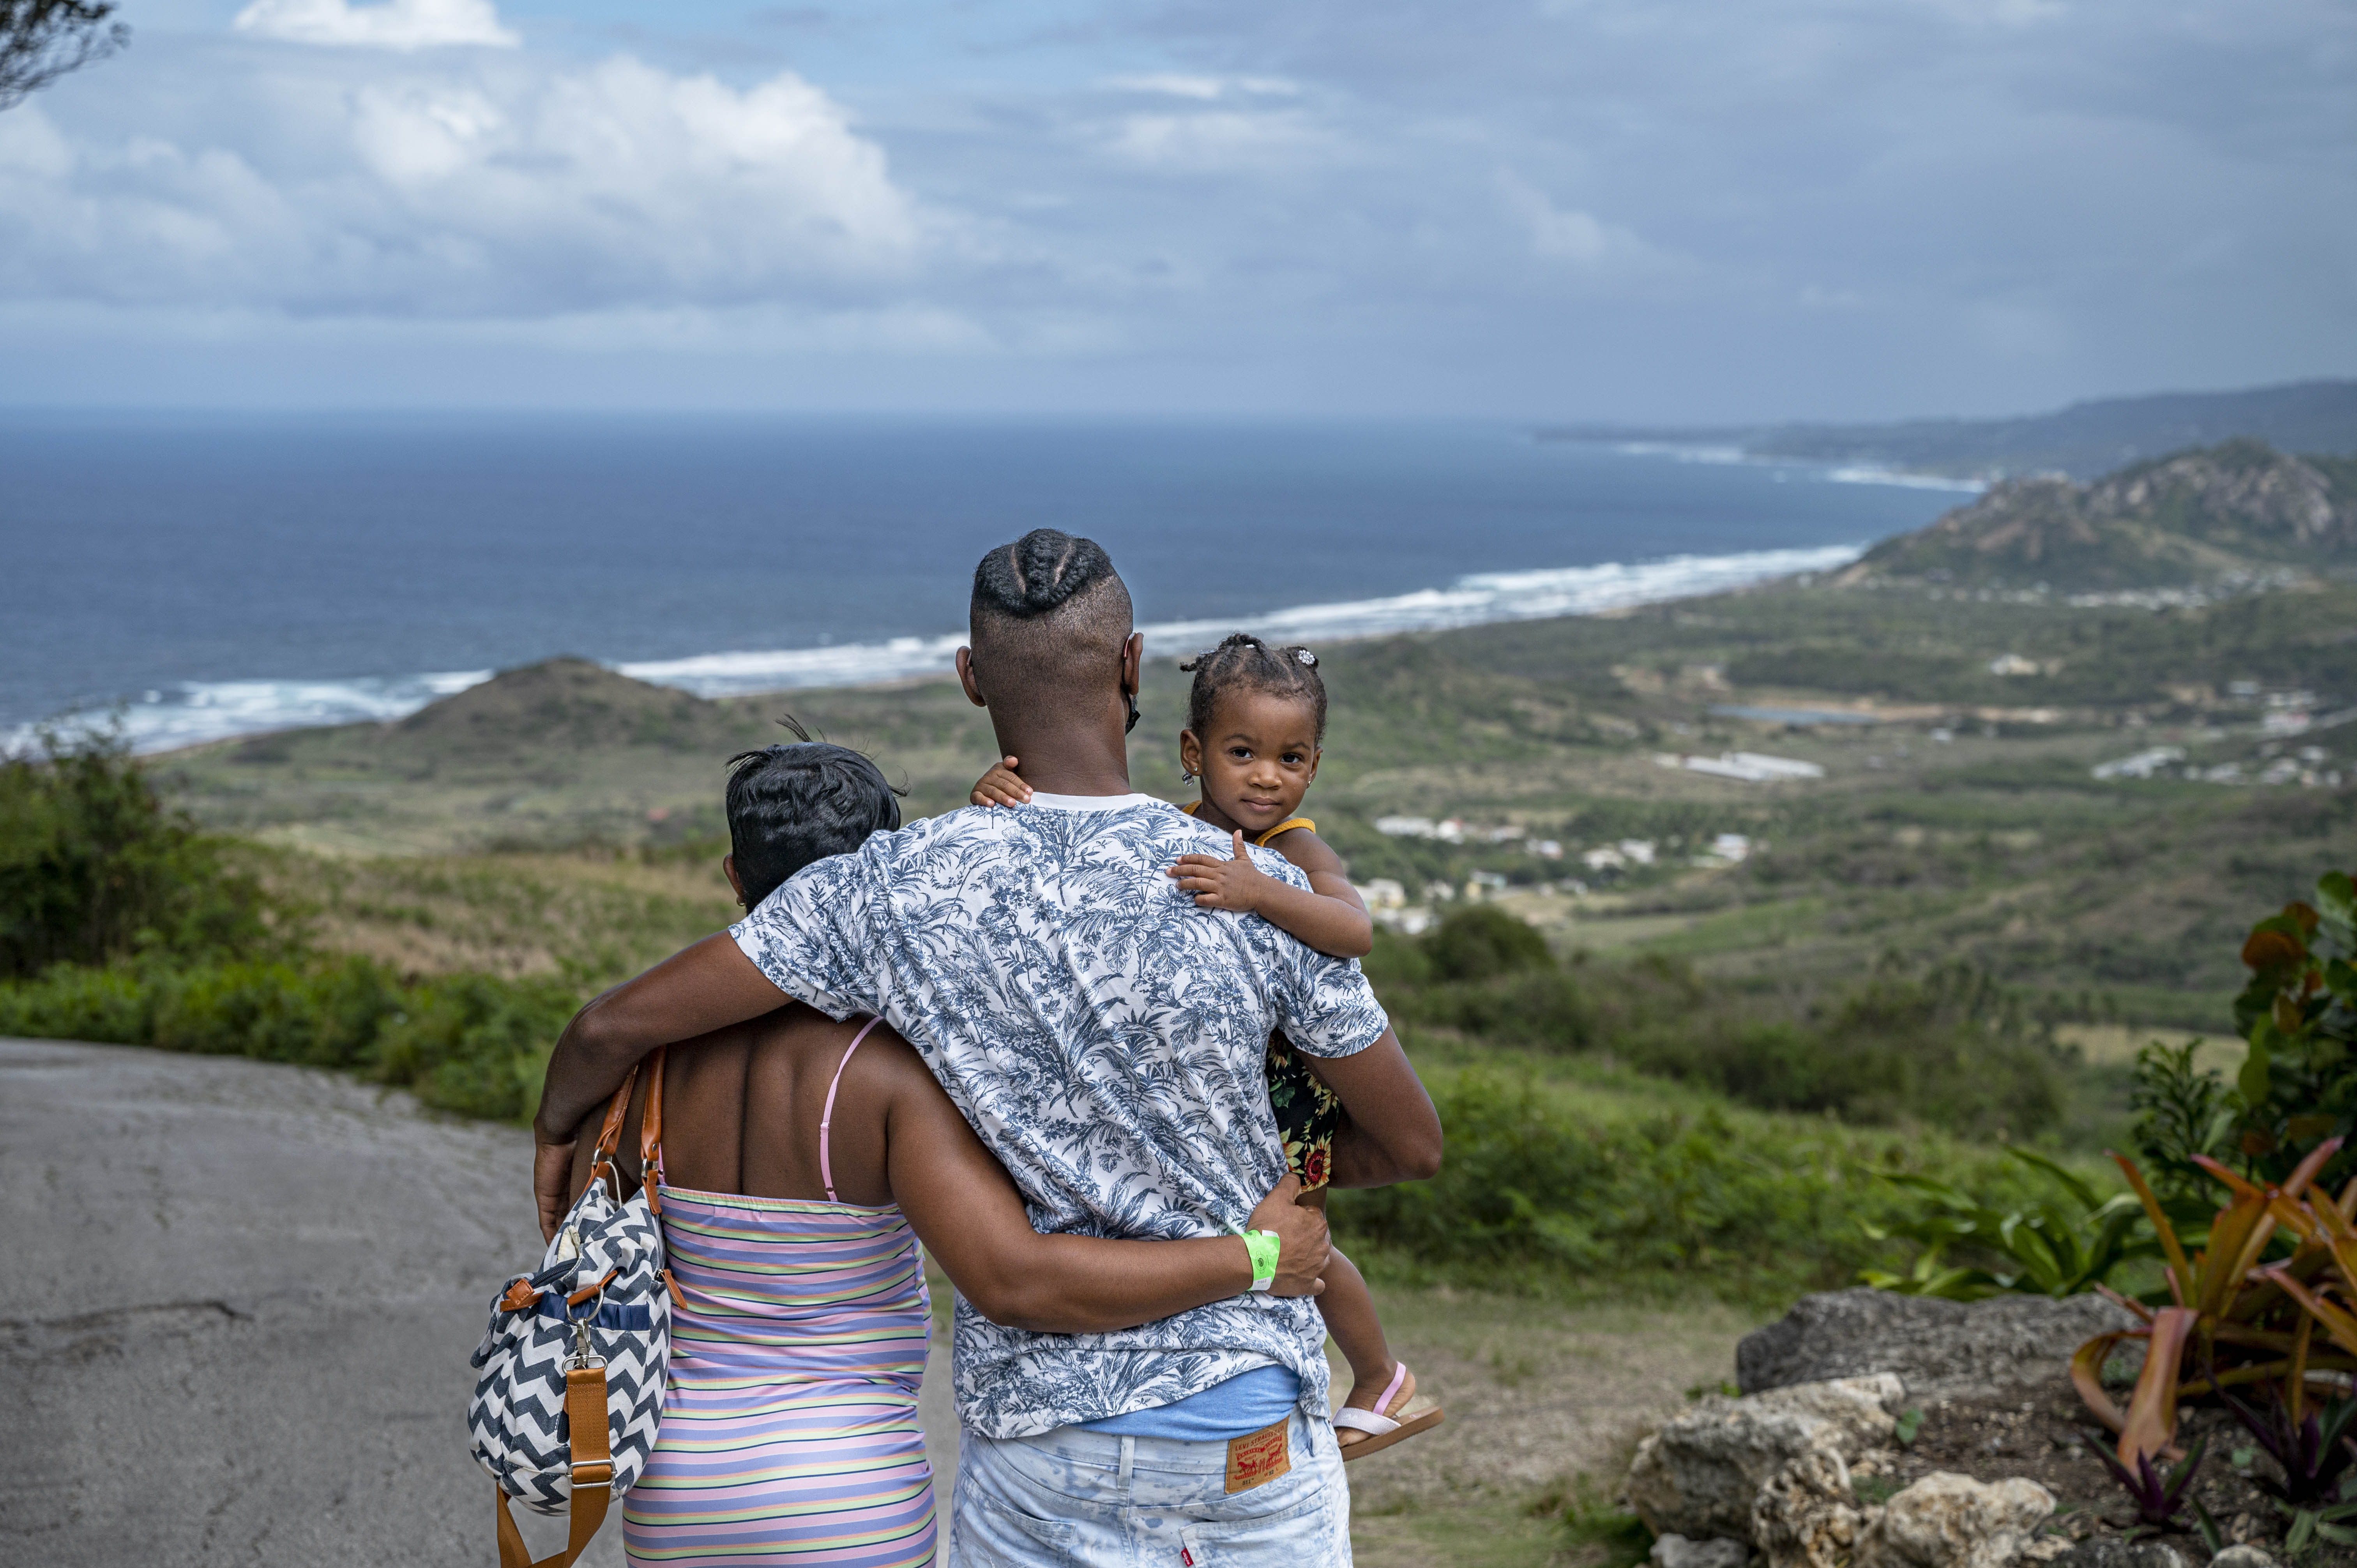 Photo of a family - father and mother holding young child - looking out over a Barbados hilltop toward the ocean.